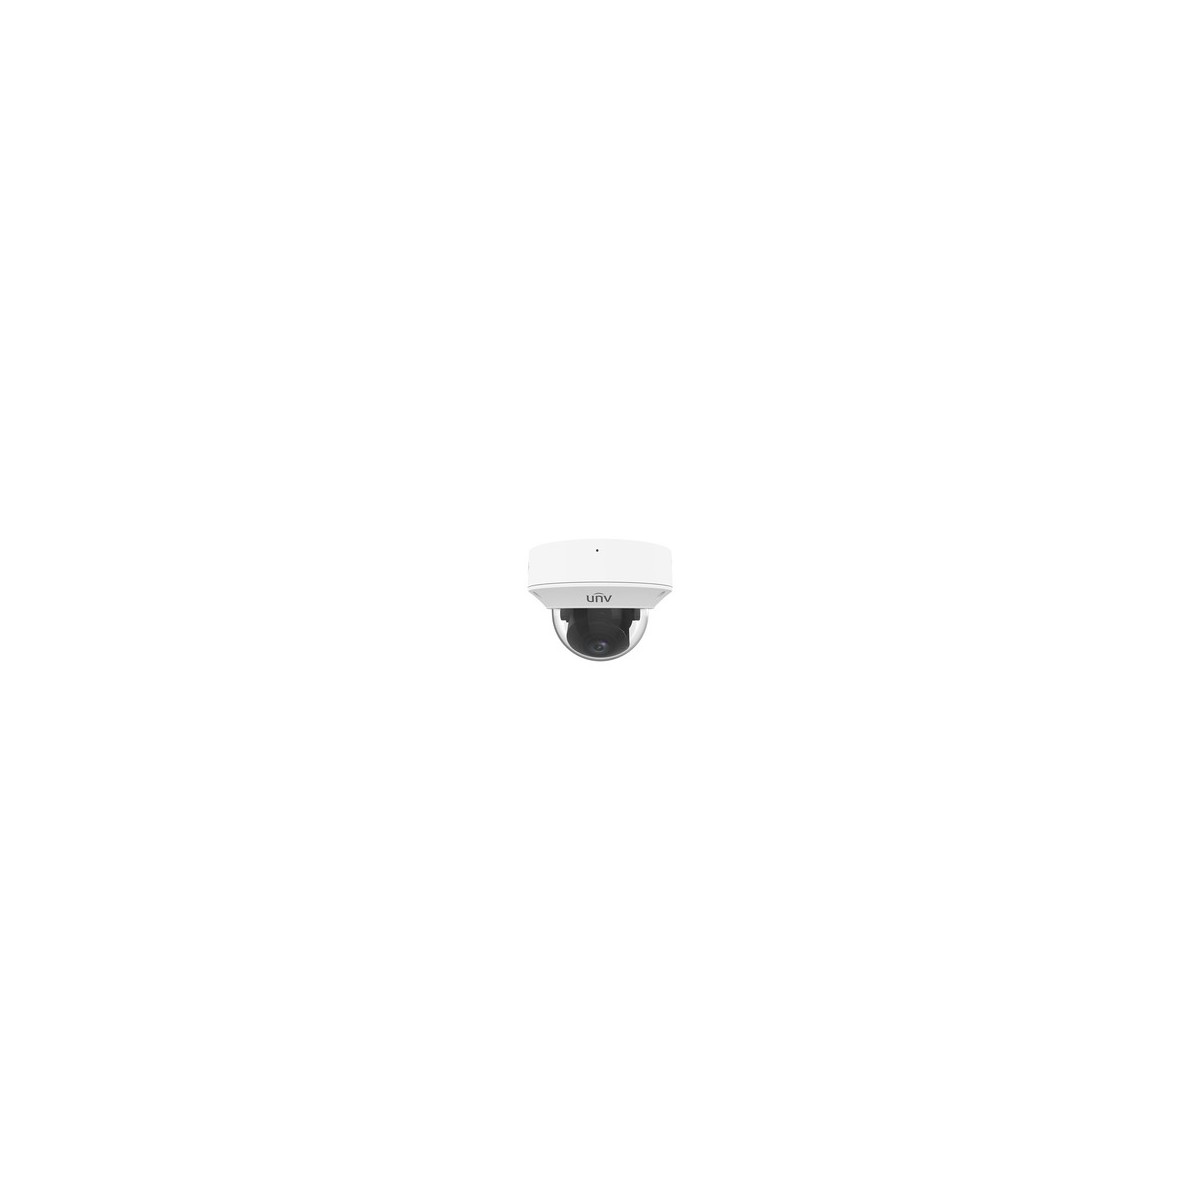 Uniview IPC3235SB-ADZK-I0 - IP security camera - Outdoor - Wired - 120 dB - Ceiling-wall - White